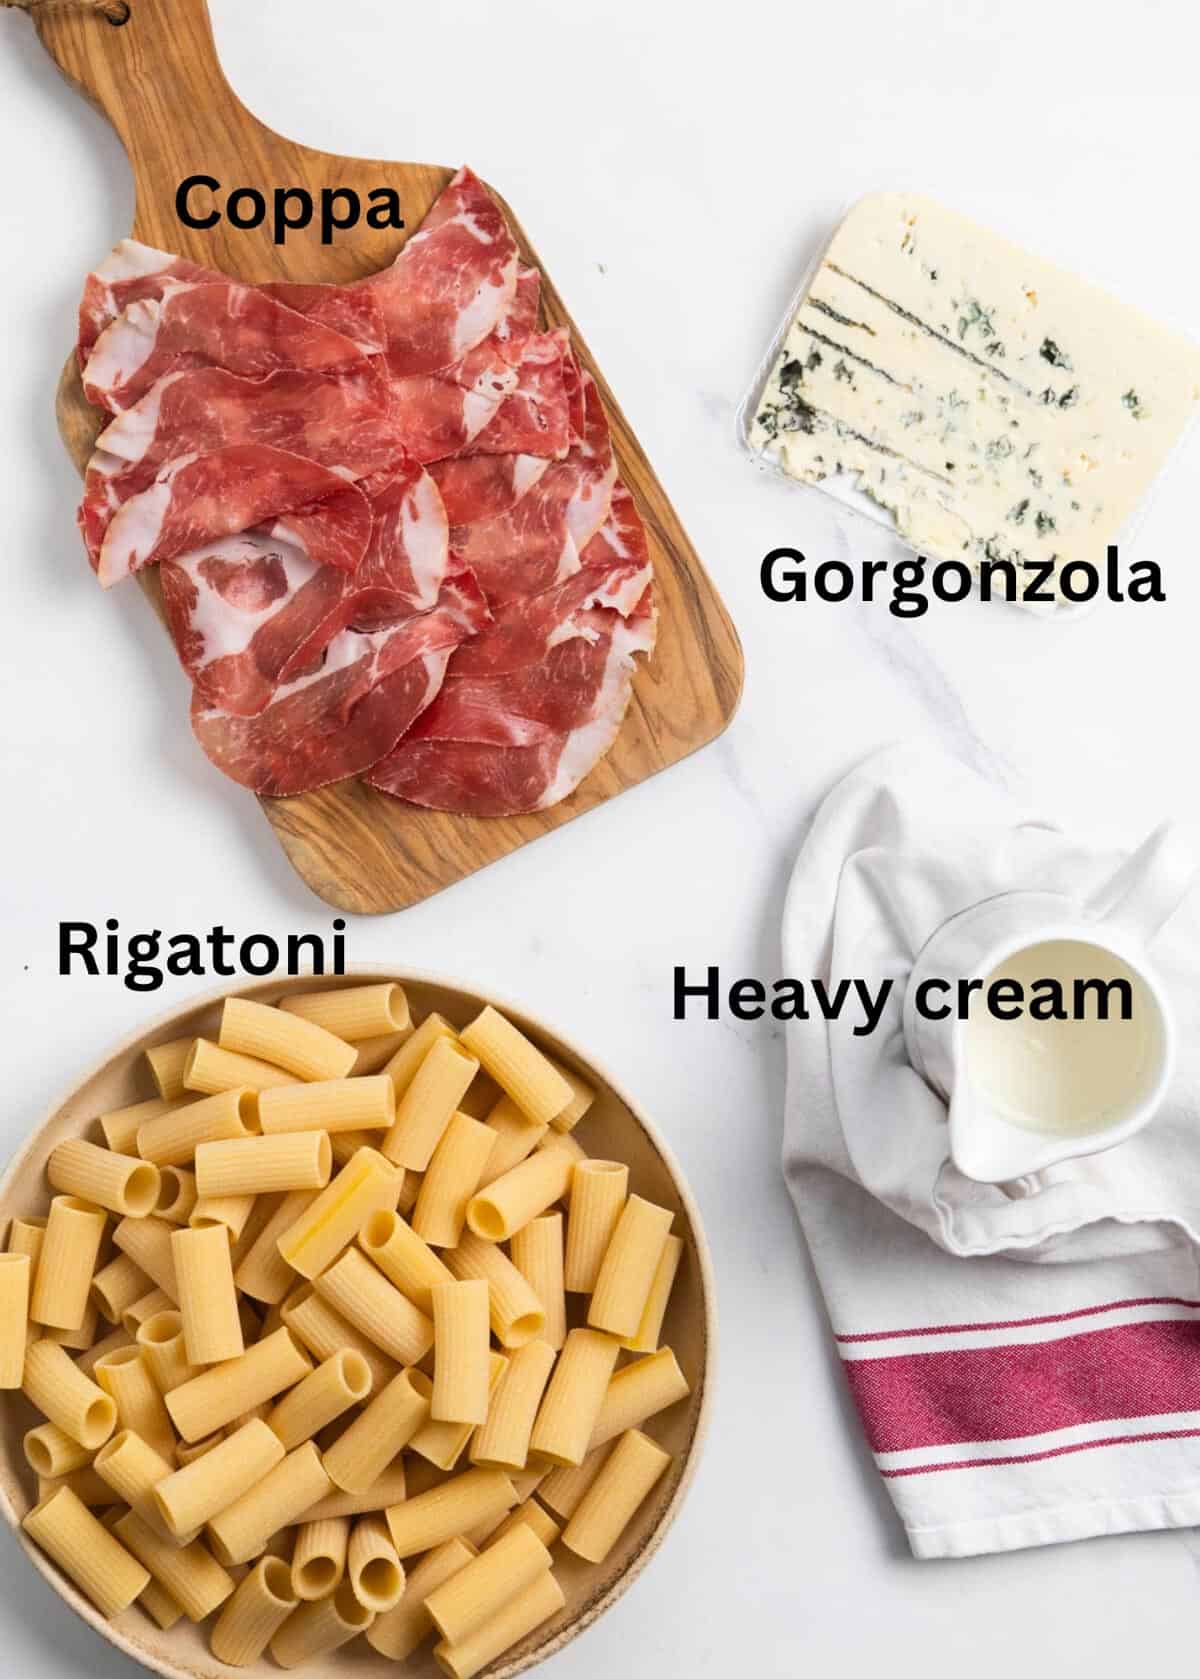 labelled ingredients on marble: rigatoni, gorgonzola, coppa and heavy cream